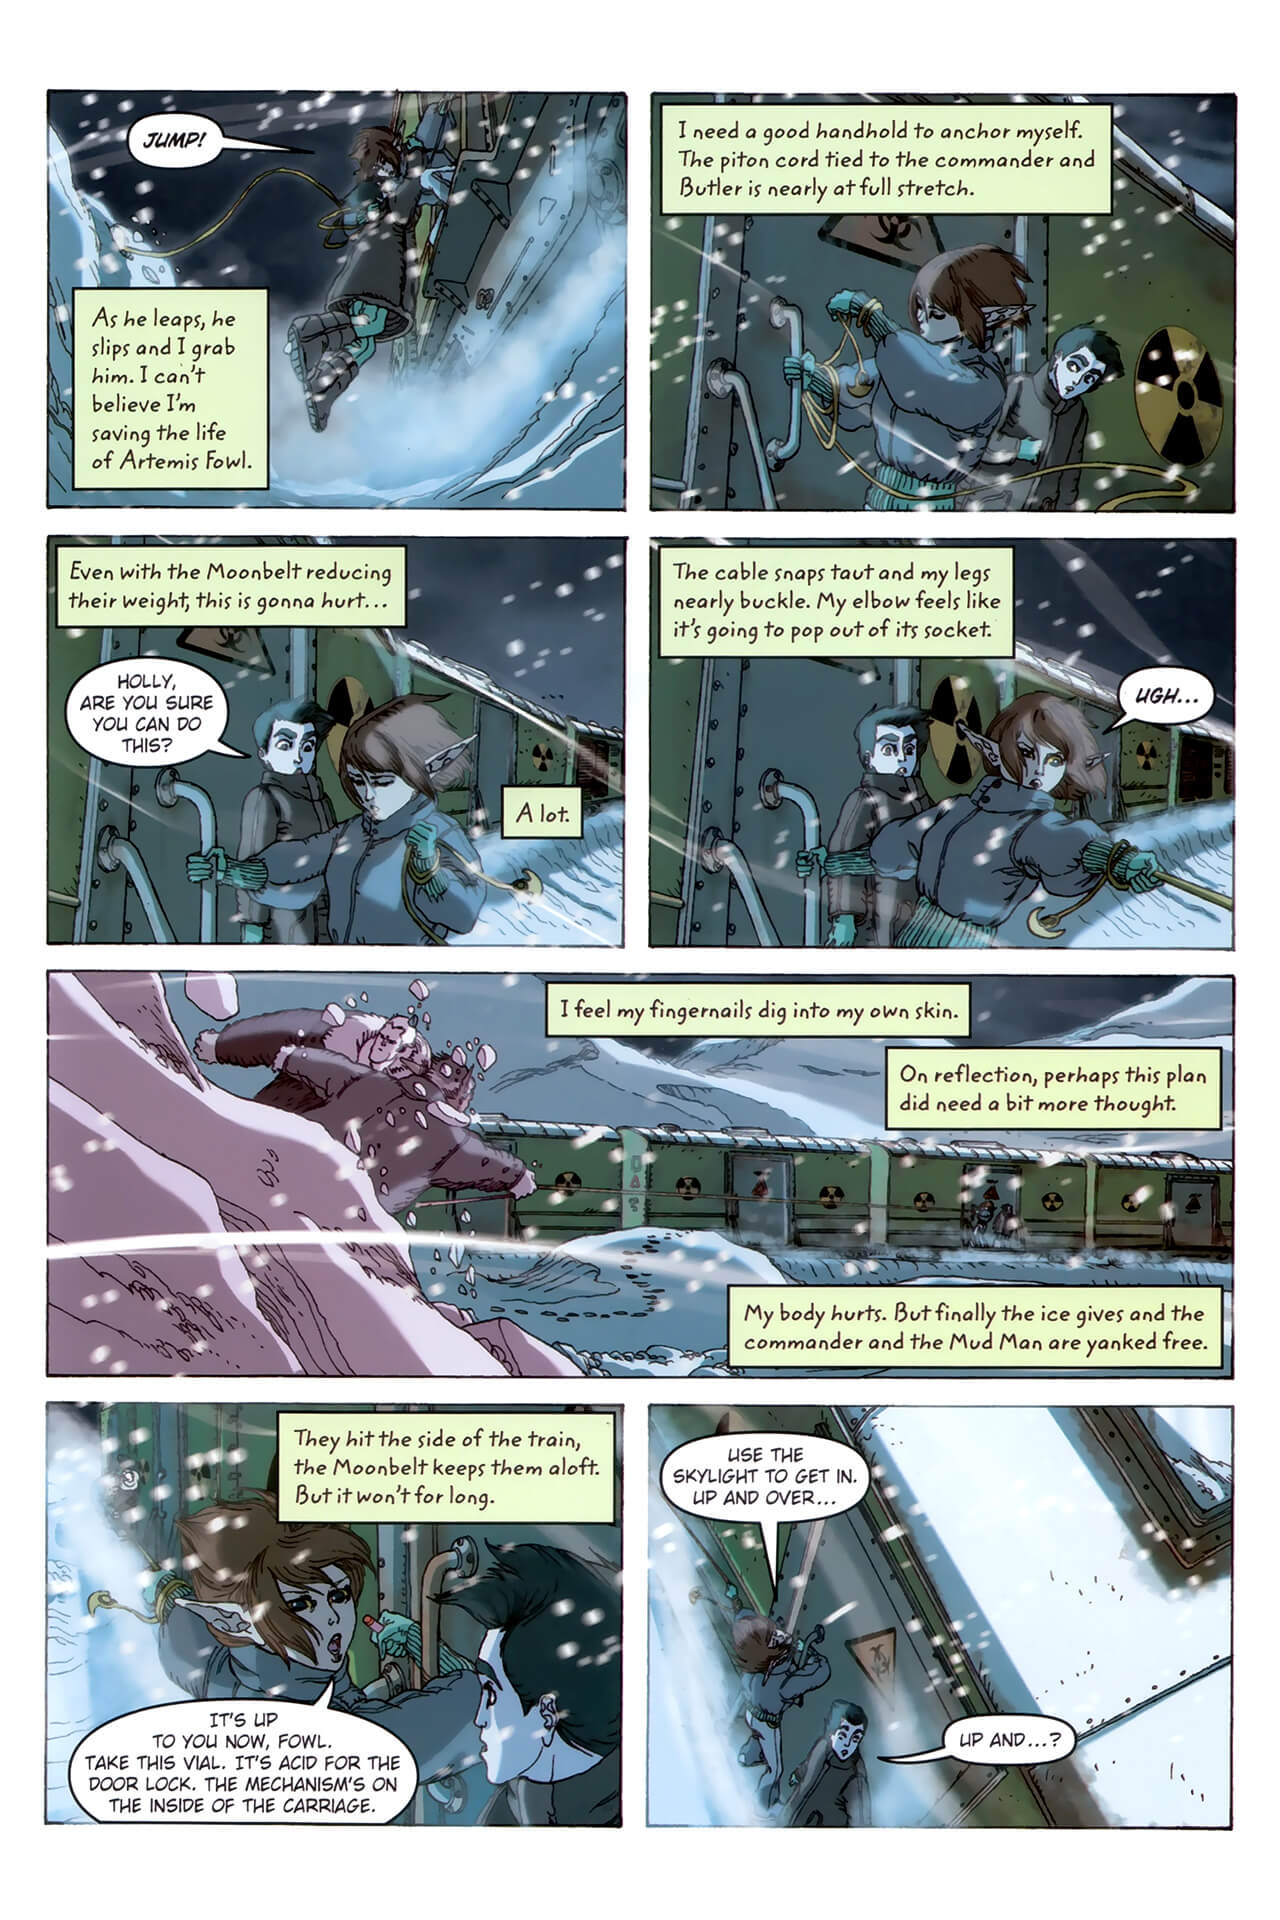 page 61 of artemis fowl the arctic incident graphic novel